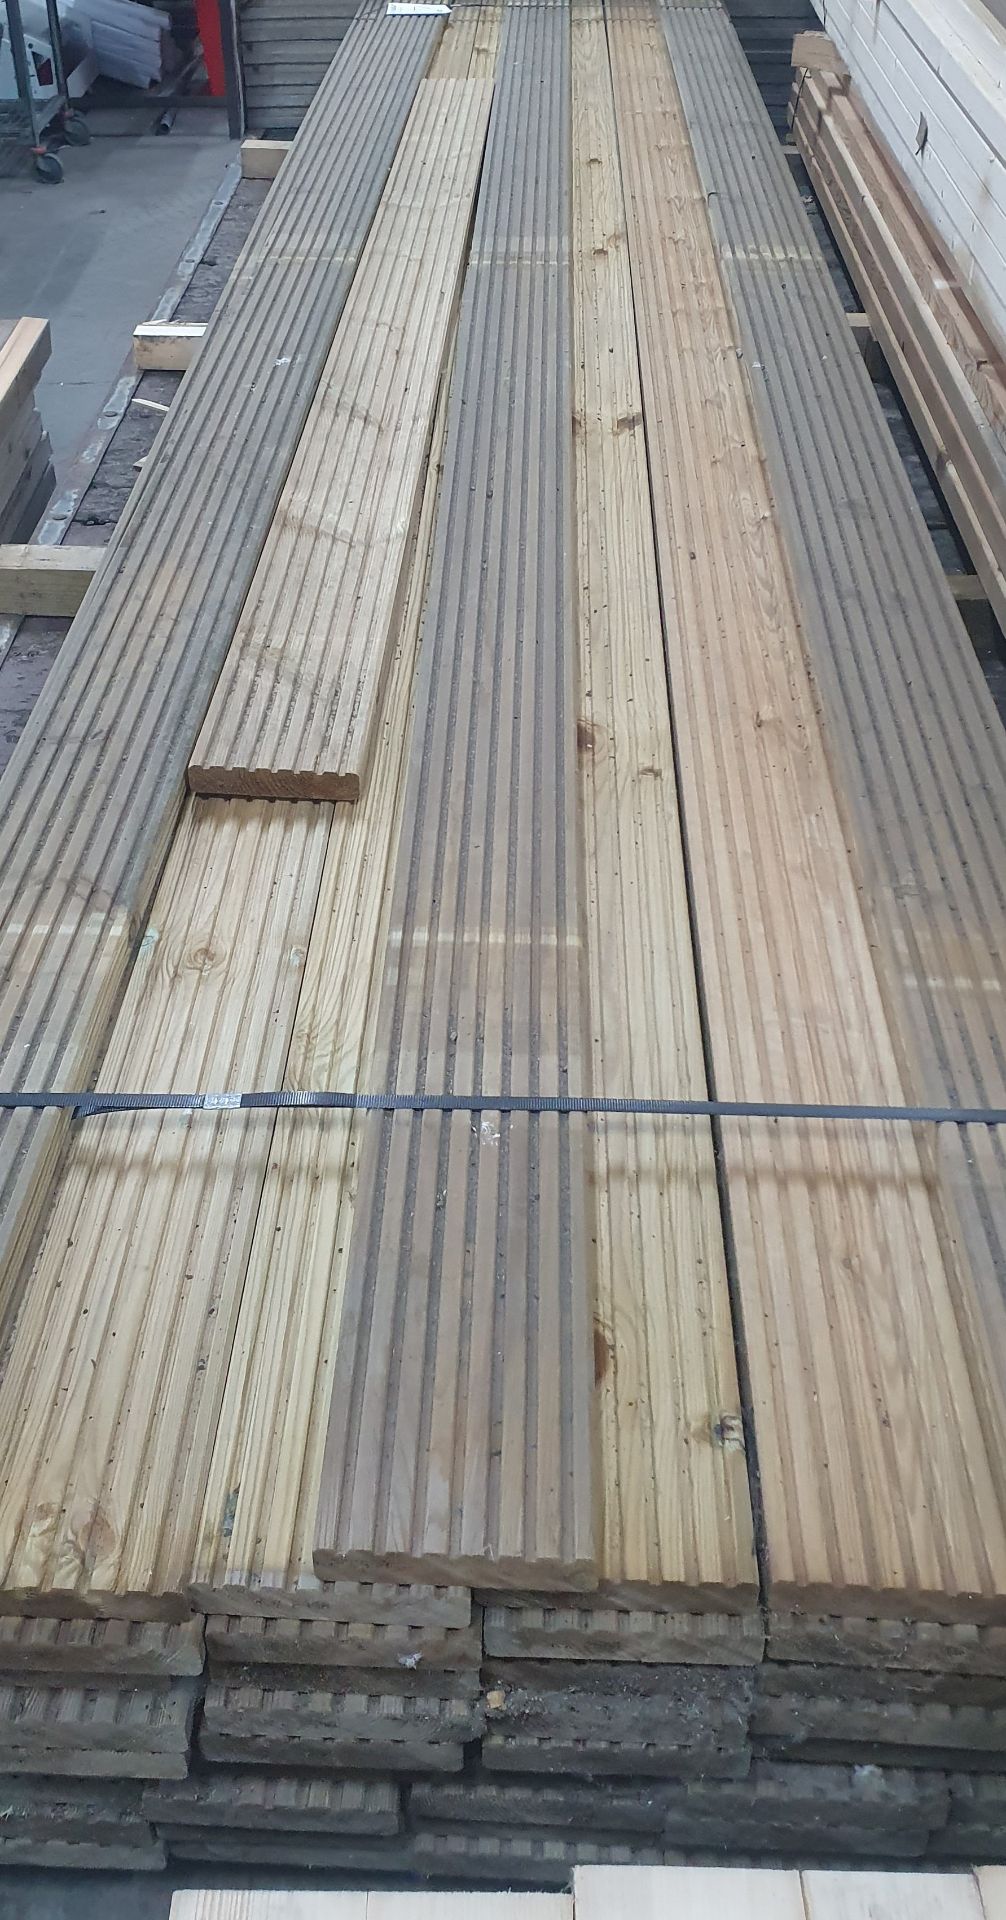 55 x Lengths of Decking | Size: (L) 420cm x (W) 14cm x (H) 3cm - Image 6 of 6